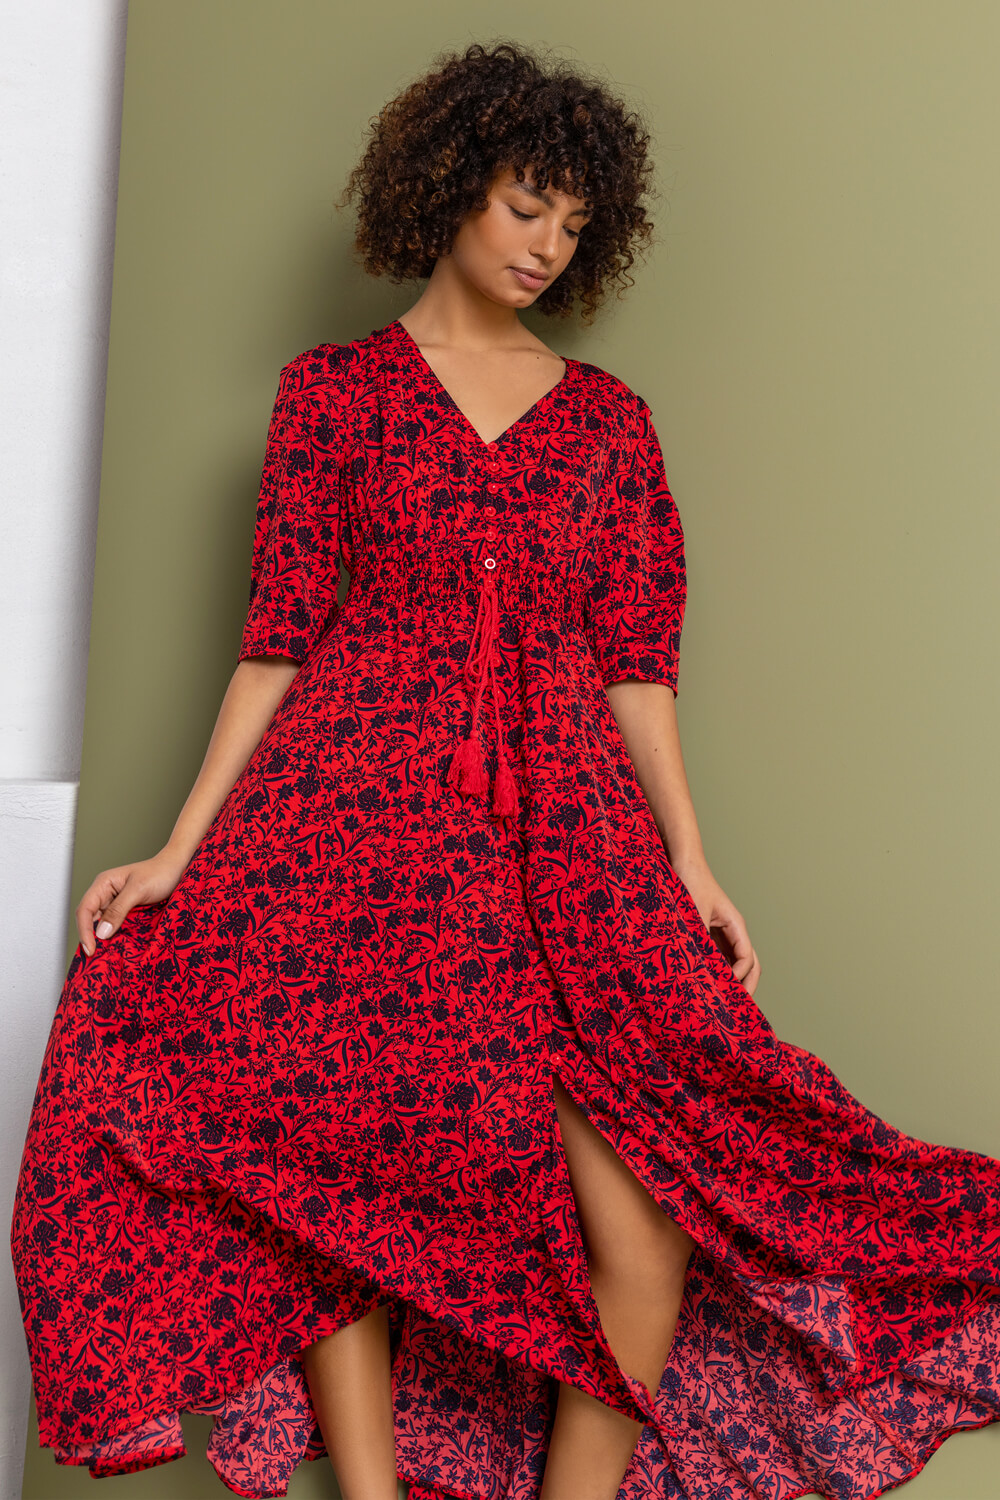 Red Floral Print Shirred Waist Maxi Dress, Image 5 of 5